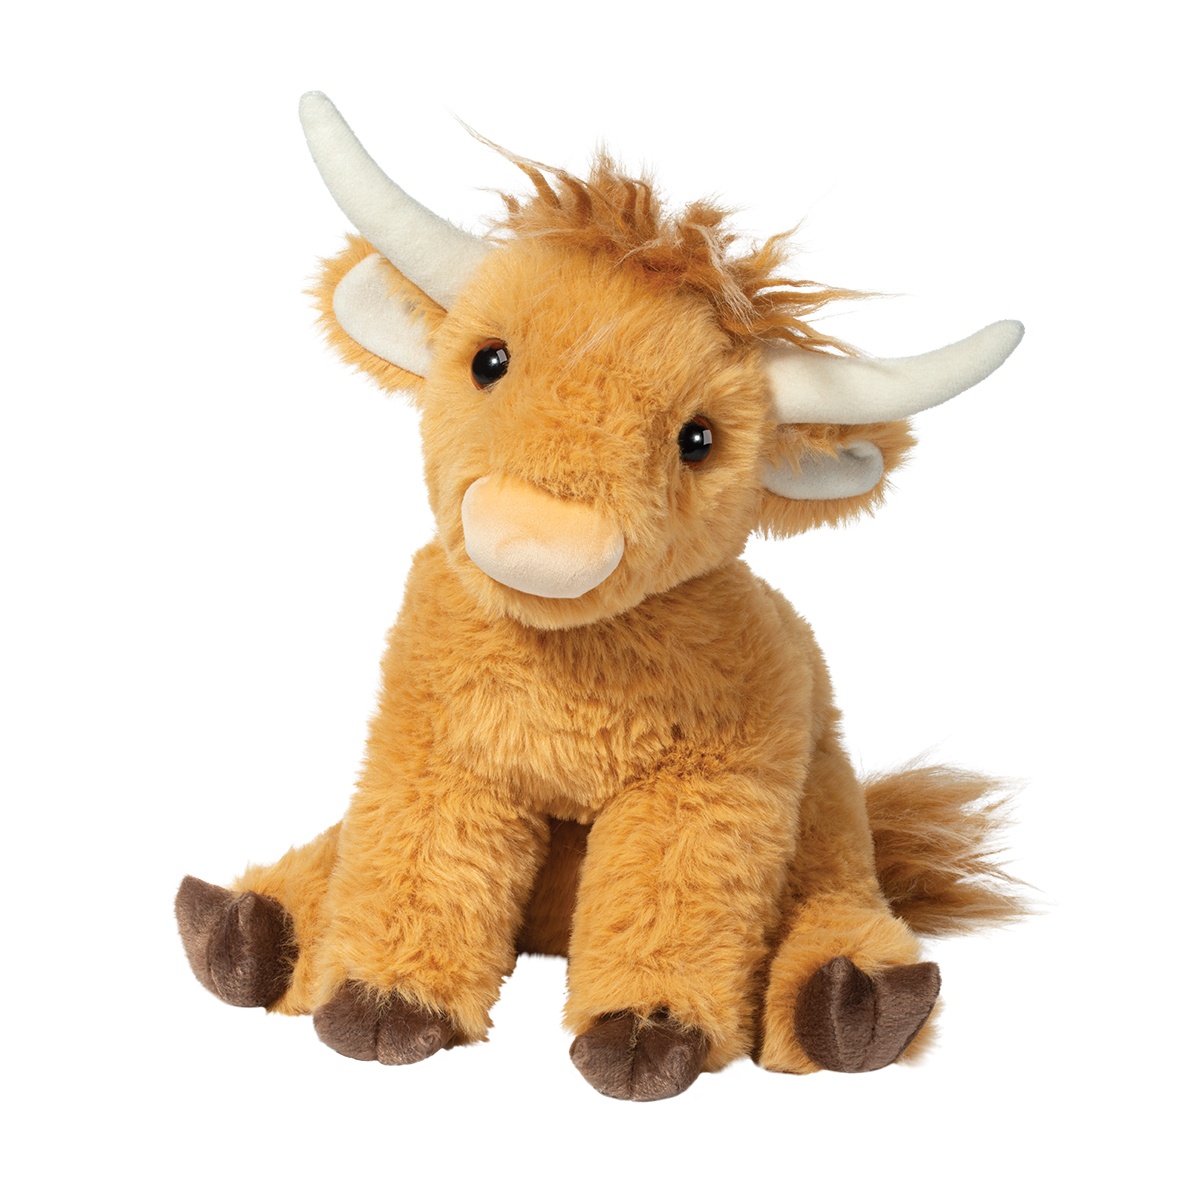 Brown Long-Haired Cows Plush Toys